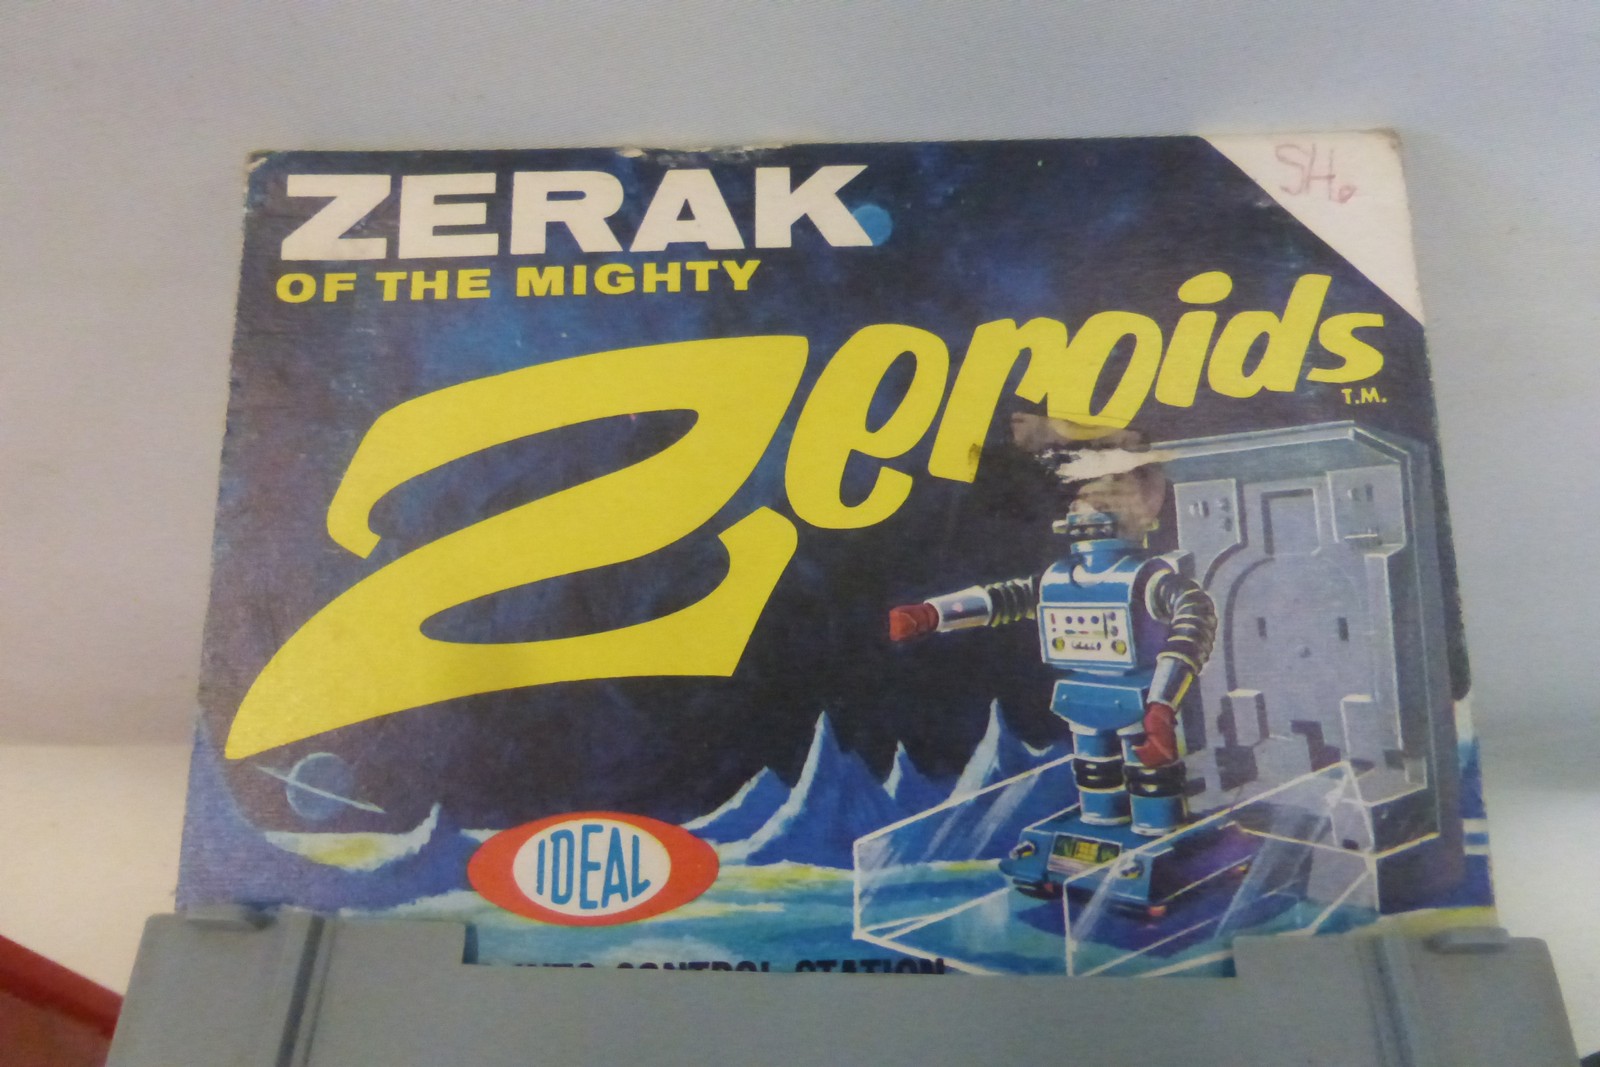 An Ideal Toy Company Zerak of The Mighty Zeroids robot in original packaging, and two others. - Image 2 of 4